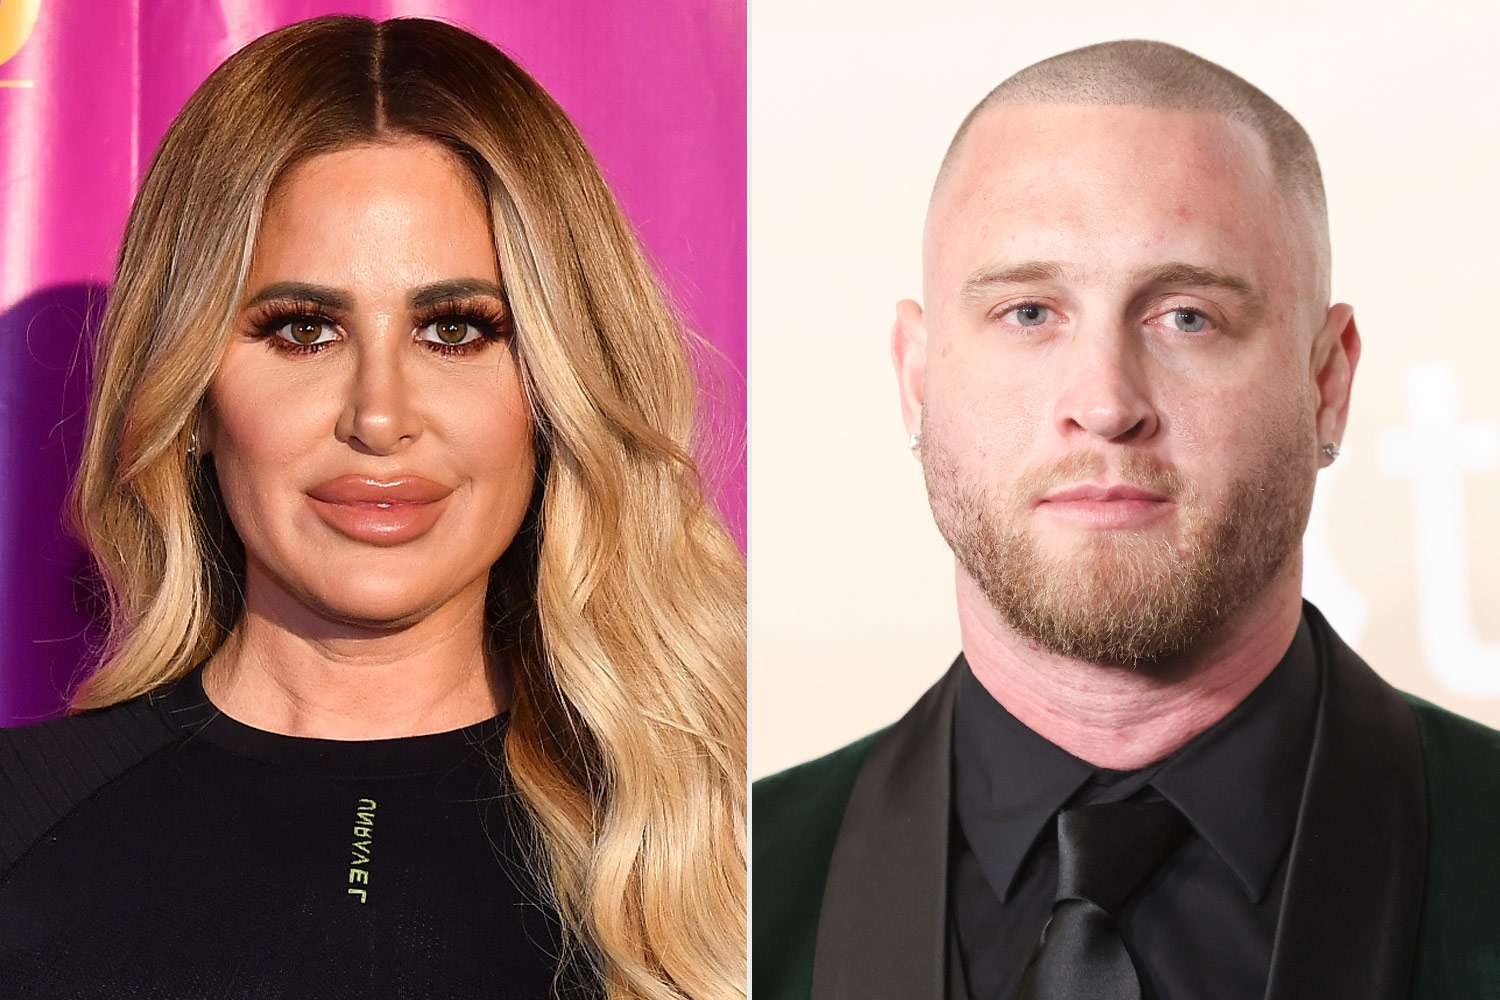 Kim Zolciak Says She and Chet Hanks 'Had a Lot of Incredible Moments' on 'Surreal Life': 'We’ll See What Happens' (Exclusive)